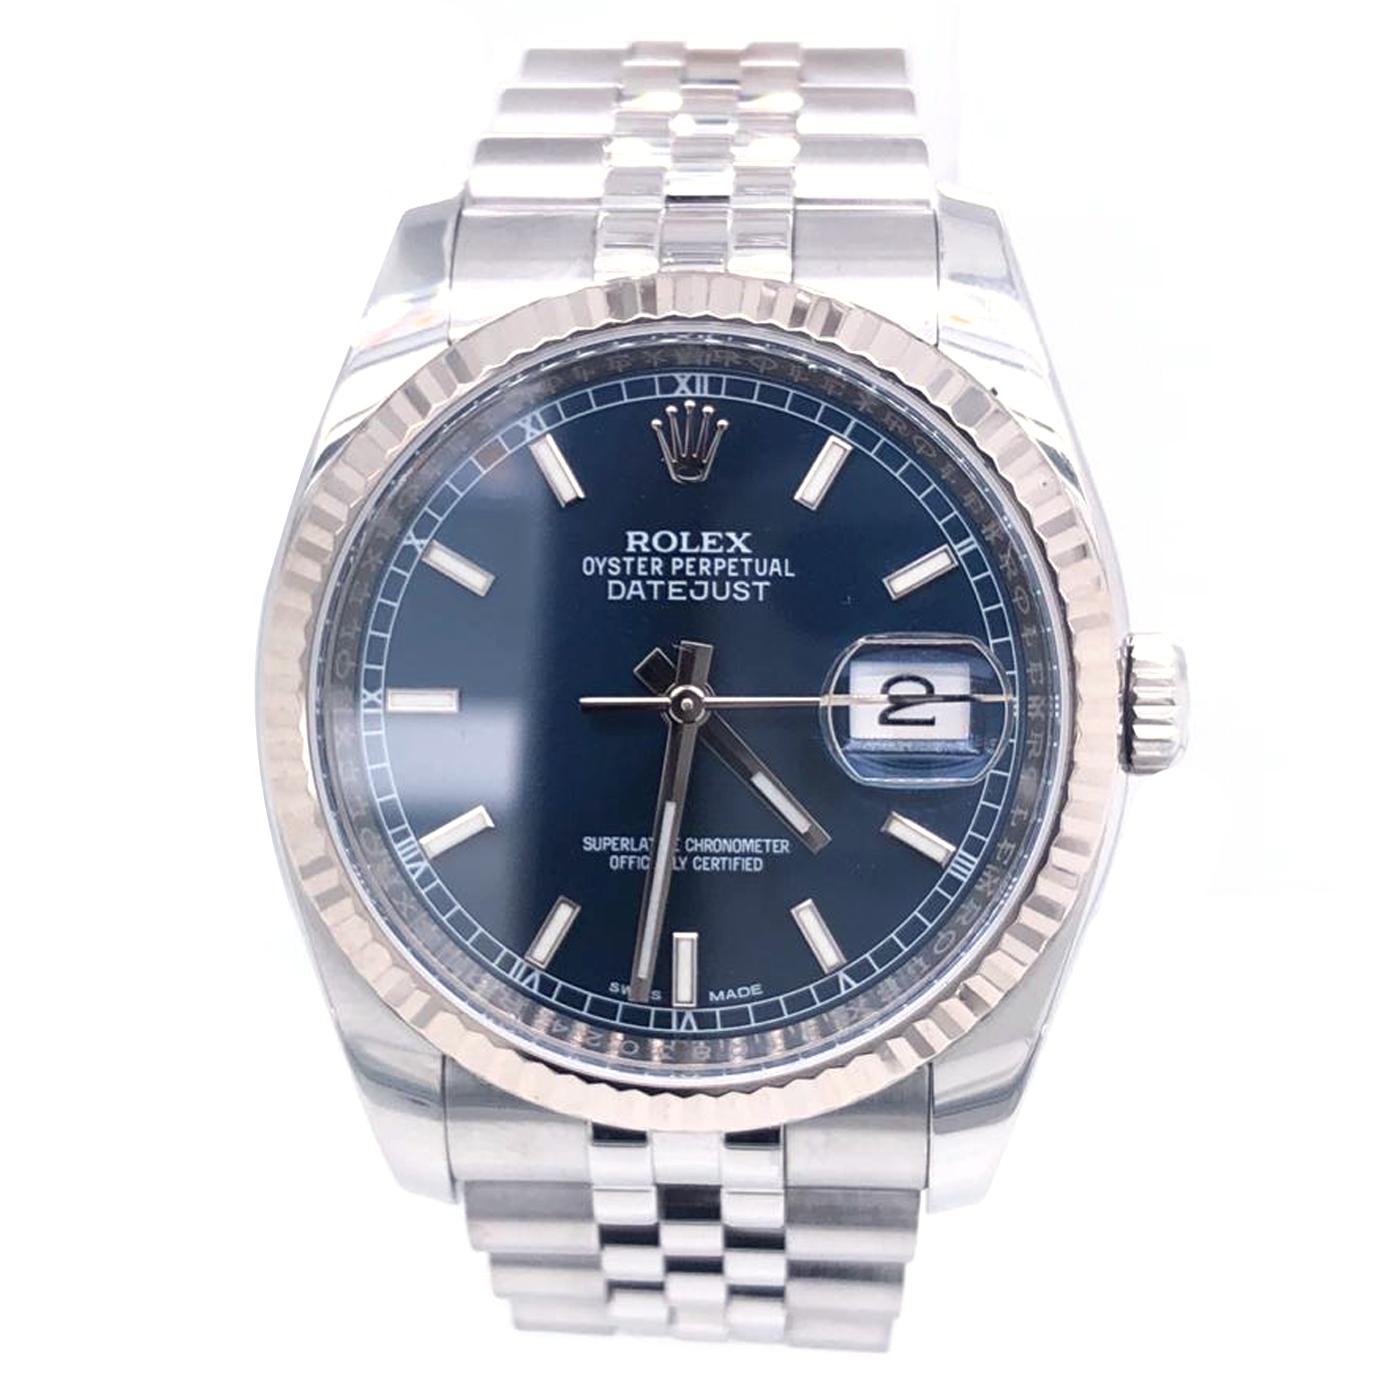 Rolex Datejust 36 White Gold/Steel Blue Index Dial & Fluted Bezel Jubilee Bracelet 116234

This classic 36mm Rolex Datejust model #116234 is perfect for everyday wear. It features a white gold fluted bezel, and is on a jubilee style bracelet with a